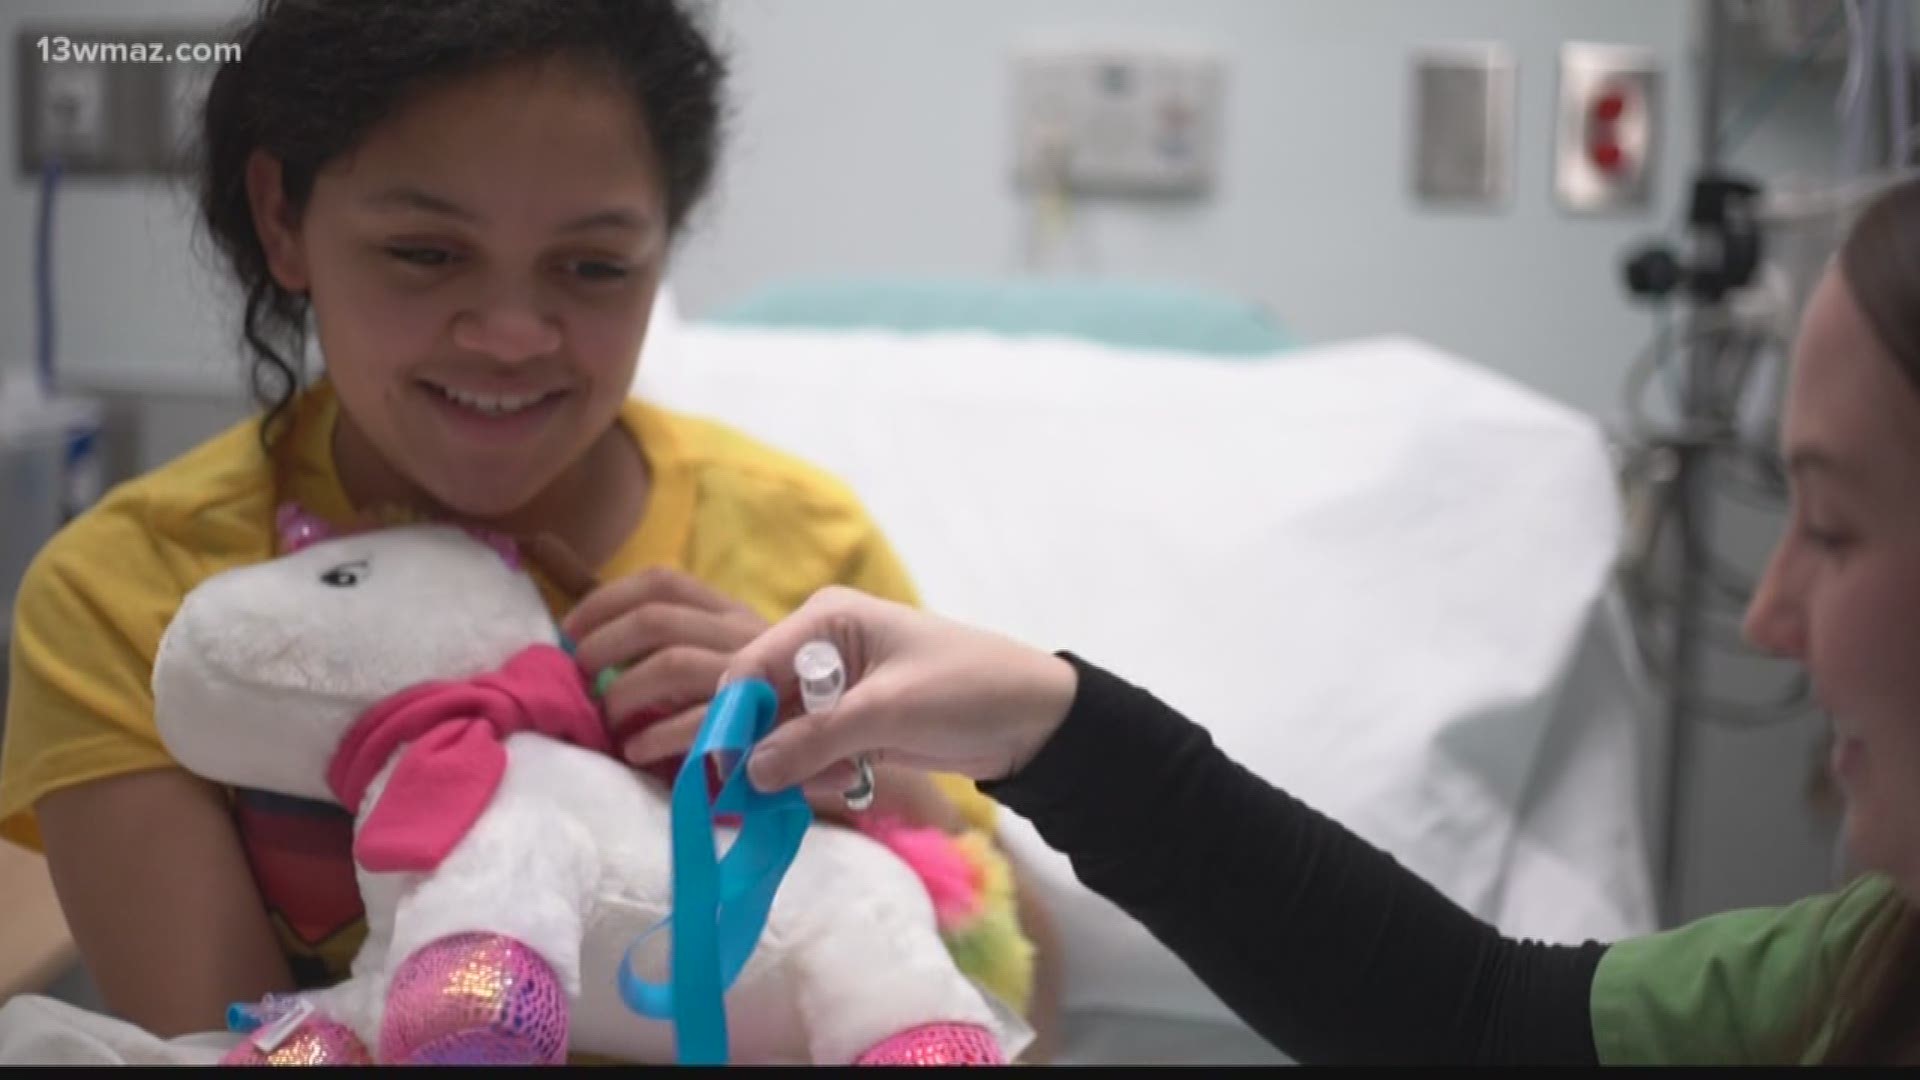 At the Beverly Knight Olson Children's Hospital, Child Life Specialists explain procedures to children, play with them, and help distract them.